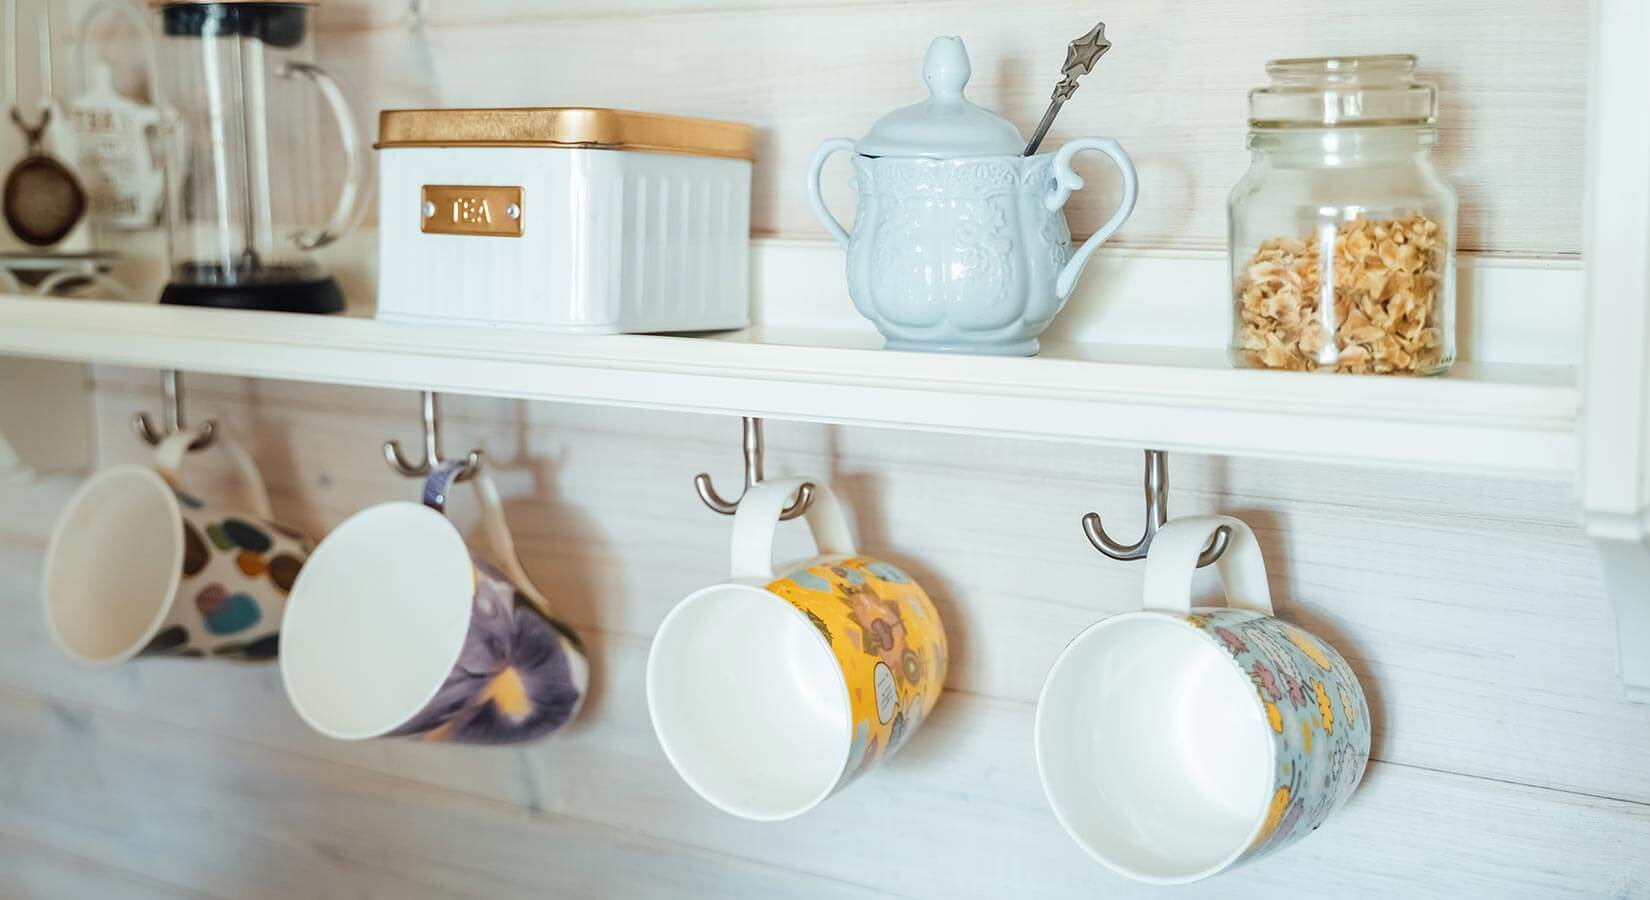 Close-up of white kitchen shelf with four colorful mugs hanging from hooks below.